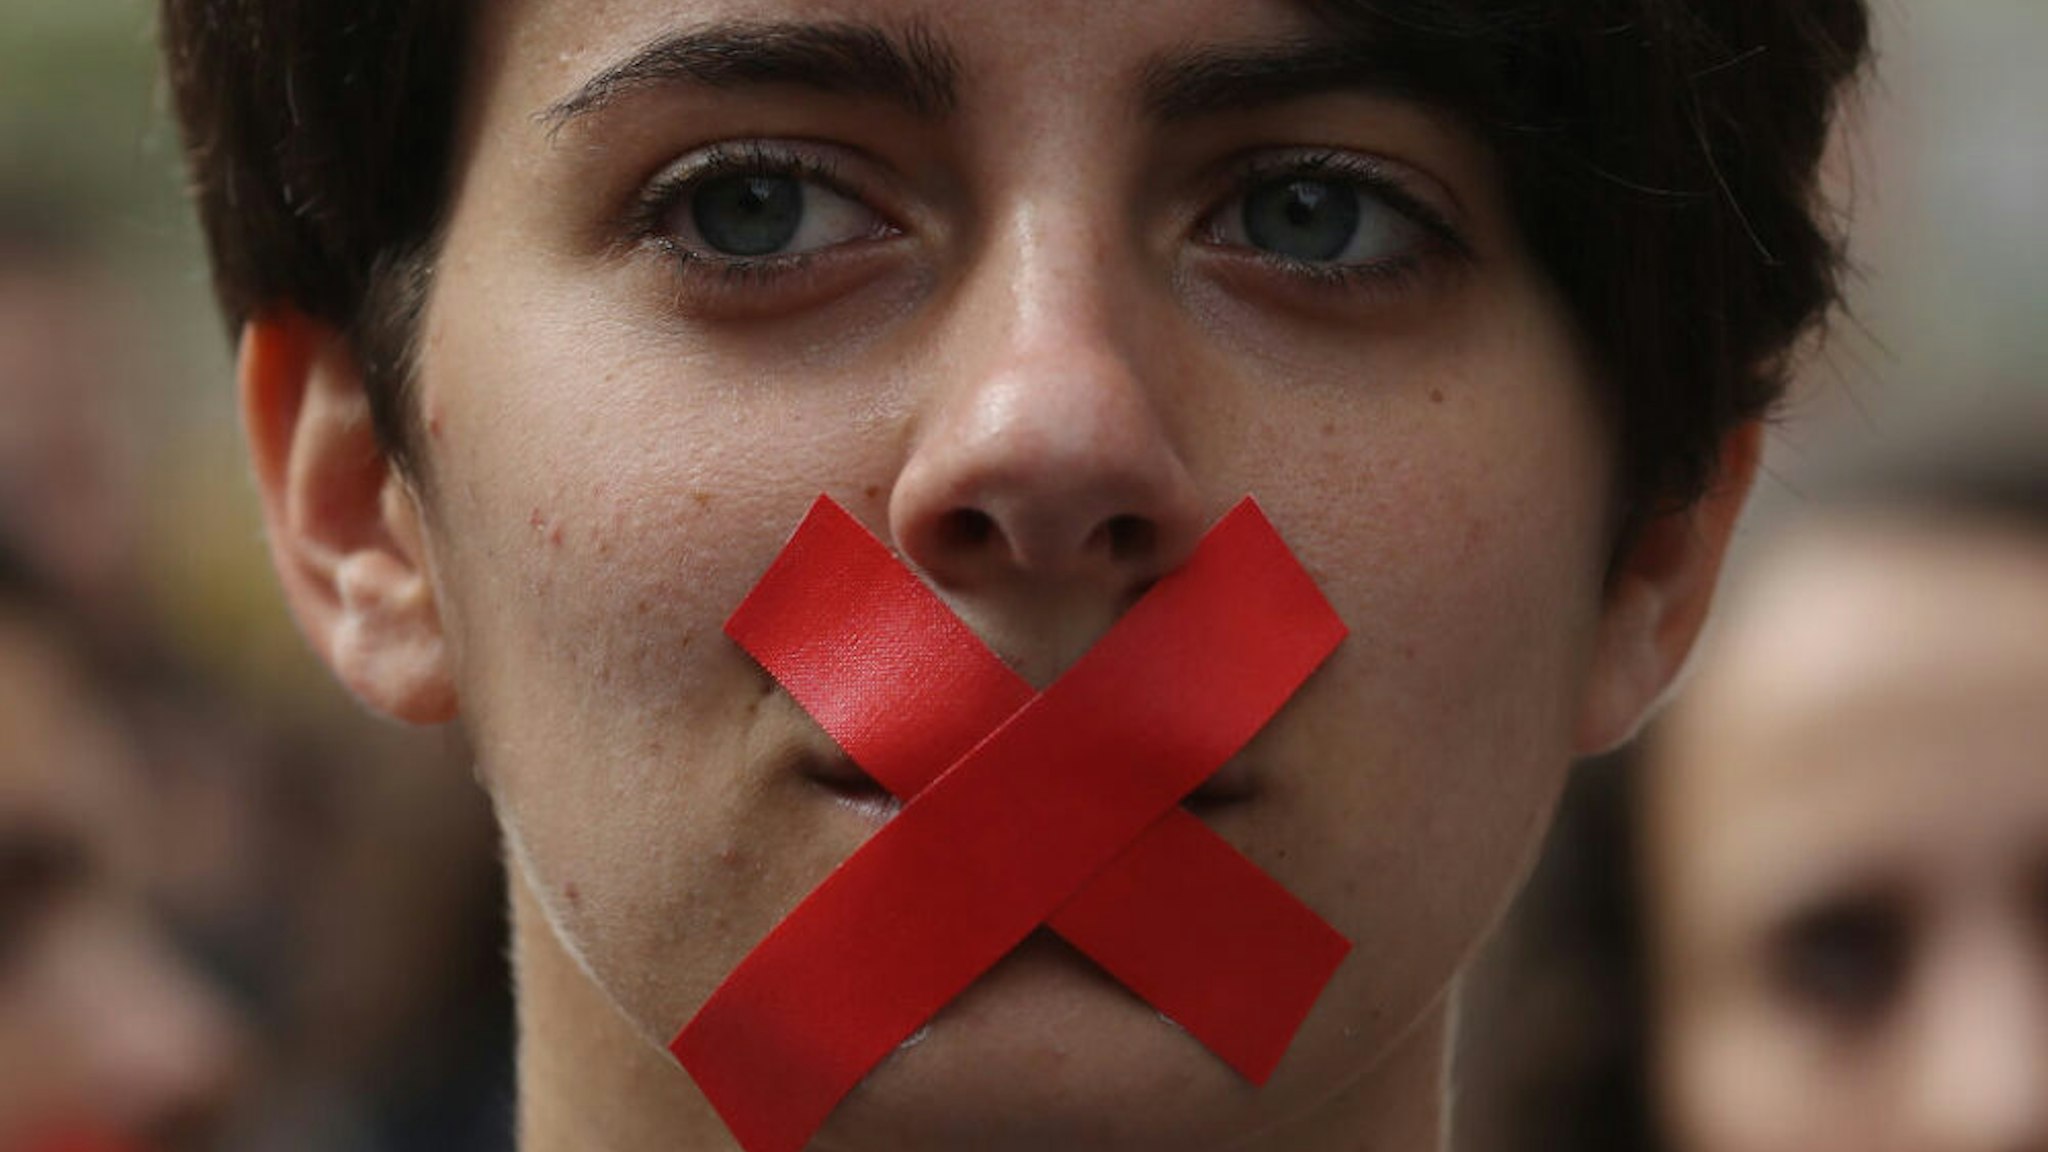 BARCELONA, SPAIN - OCTOBER 02: Students hold a silent protest against the violence that marred yesterday's referendum vote outside the University on October 2, 2017 in Barcelona, Spain. Catalonia's government met Monday to discuss plans to declare independence after the results of yesterday's disputed referendum.